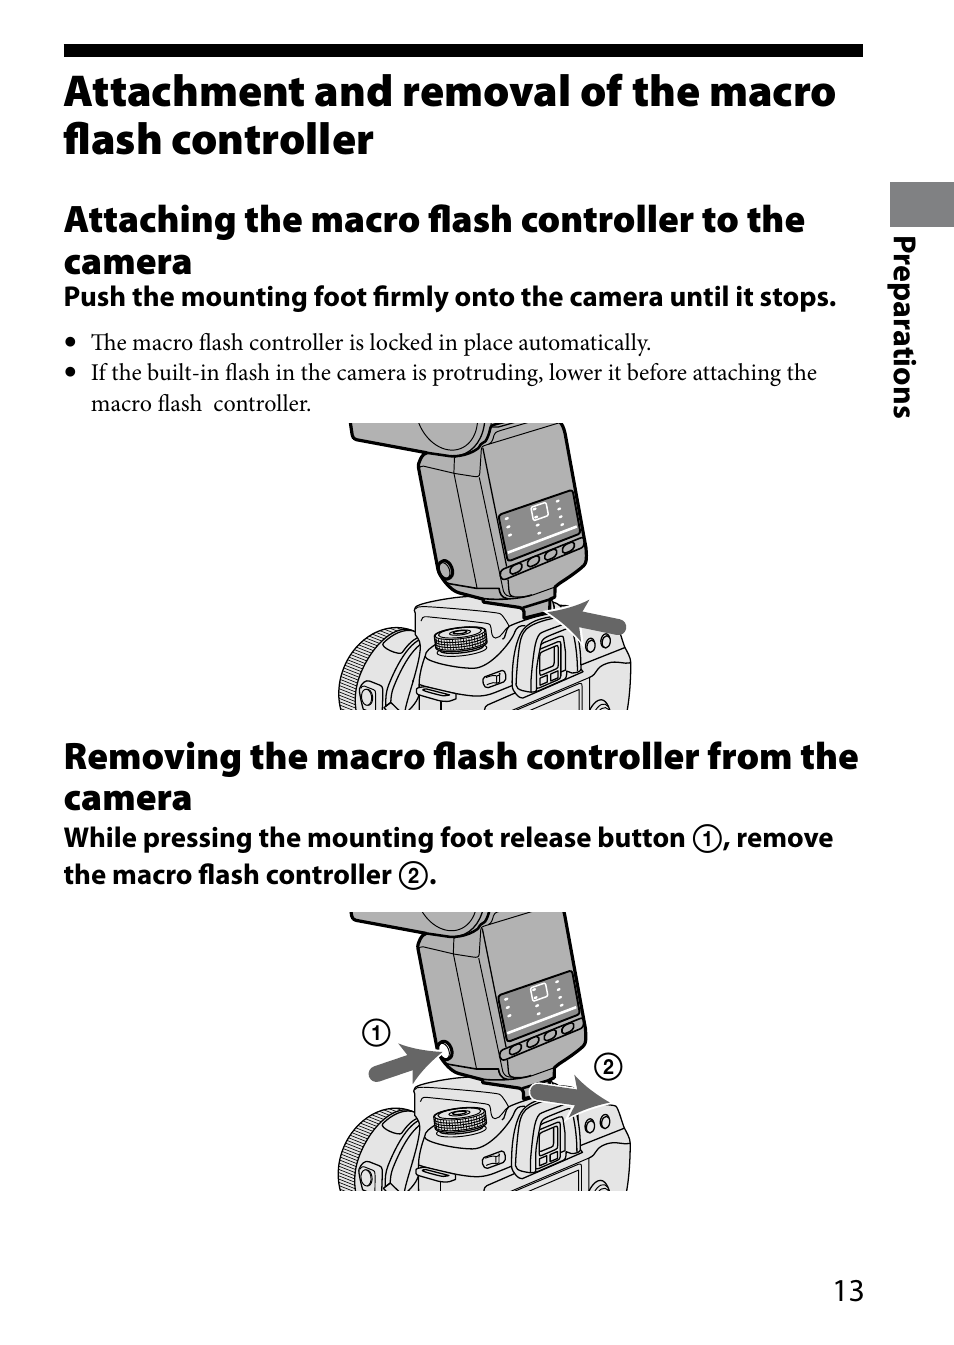 Attachment and removal of the, Macro flash controller, Attaching the macro flash controller to the camera | Sony HVL-MT24AM User Manual | Page 13 / 295